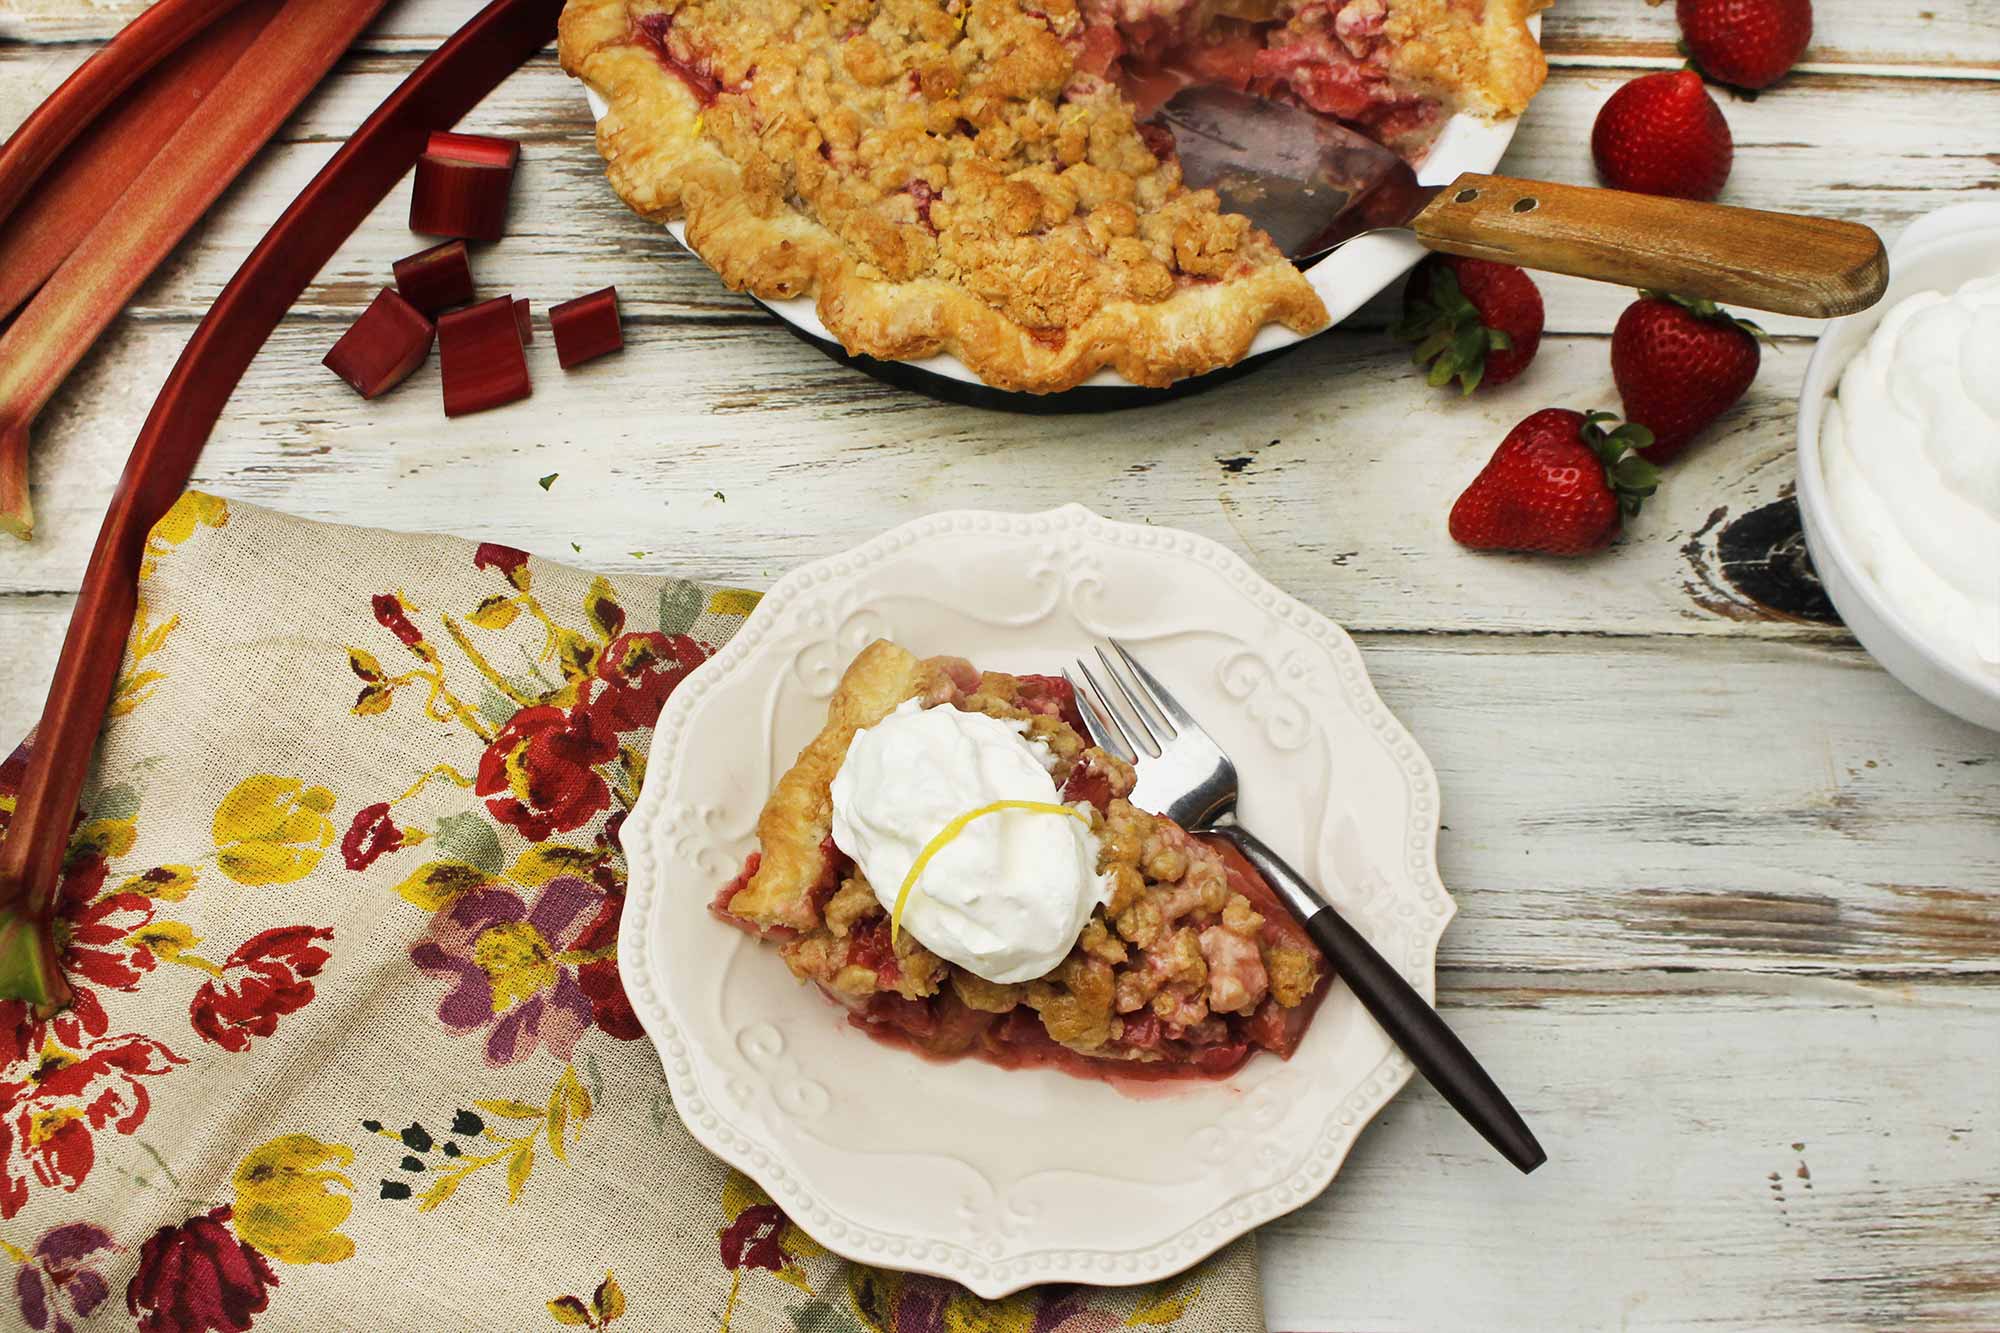 Farm Fresh To You Recipe Strawberry Rhubarb Pie With Streusel Topping,Cooking Beef Ribs In The Oven